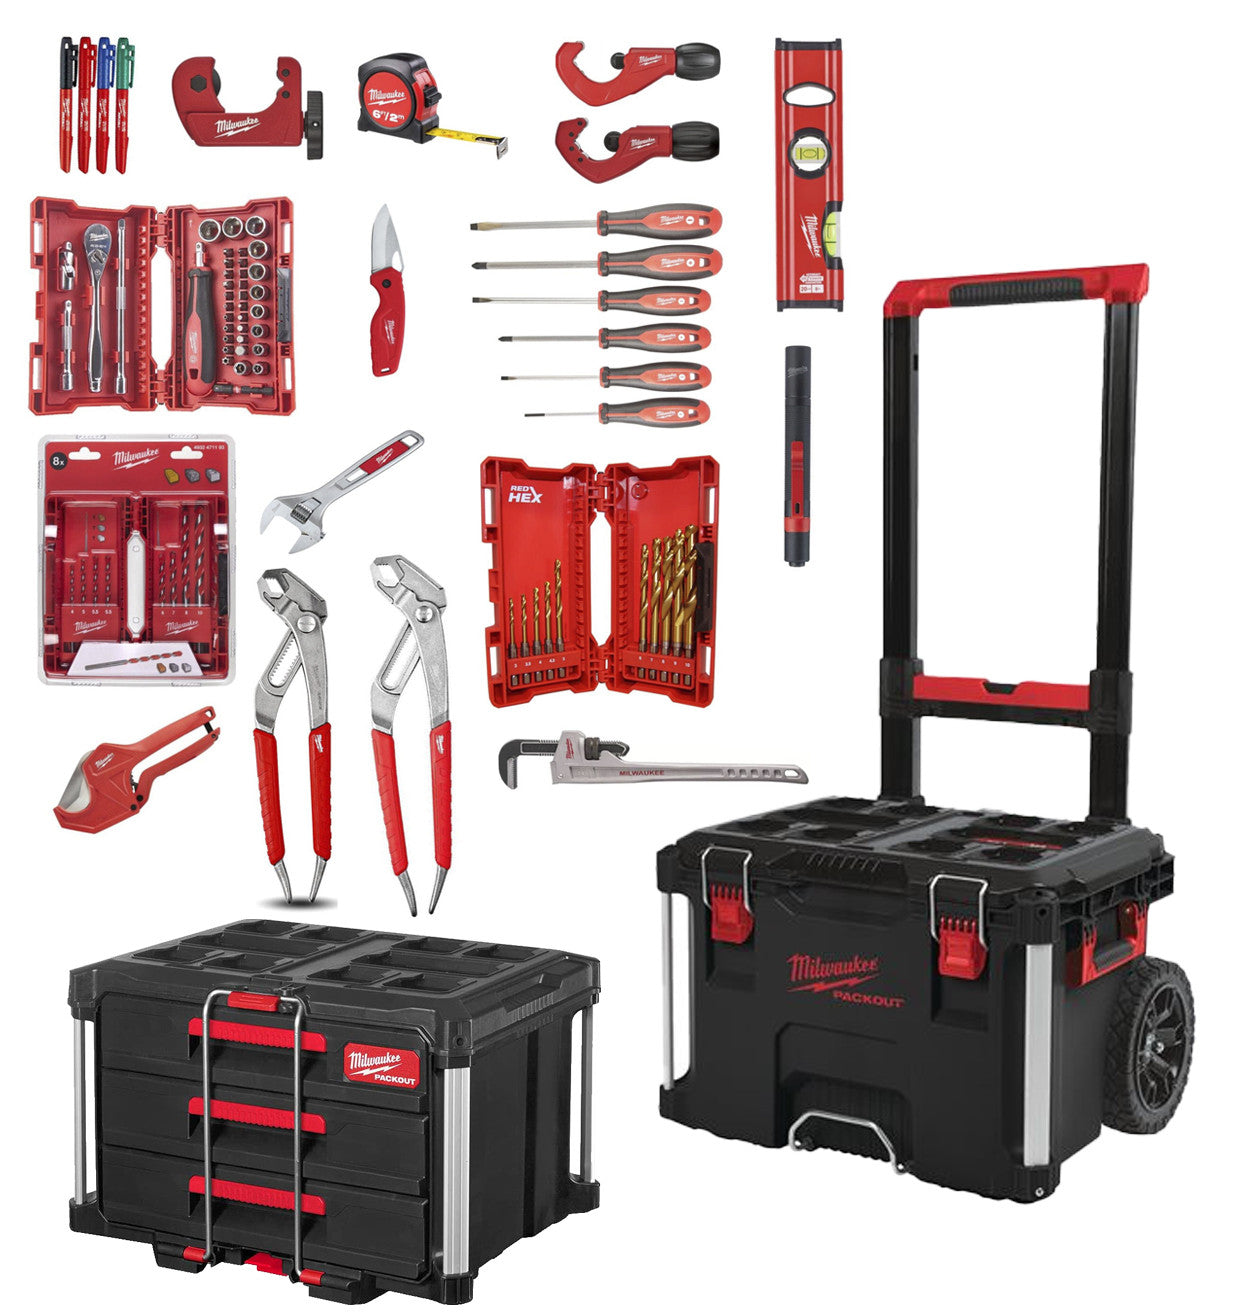 Packout Installer Kit with 17 Milwaukee tools